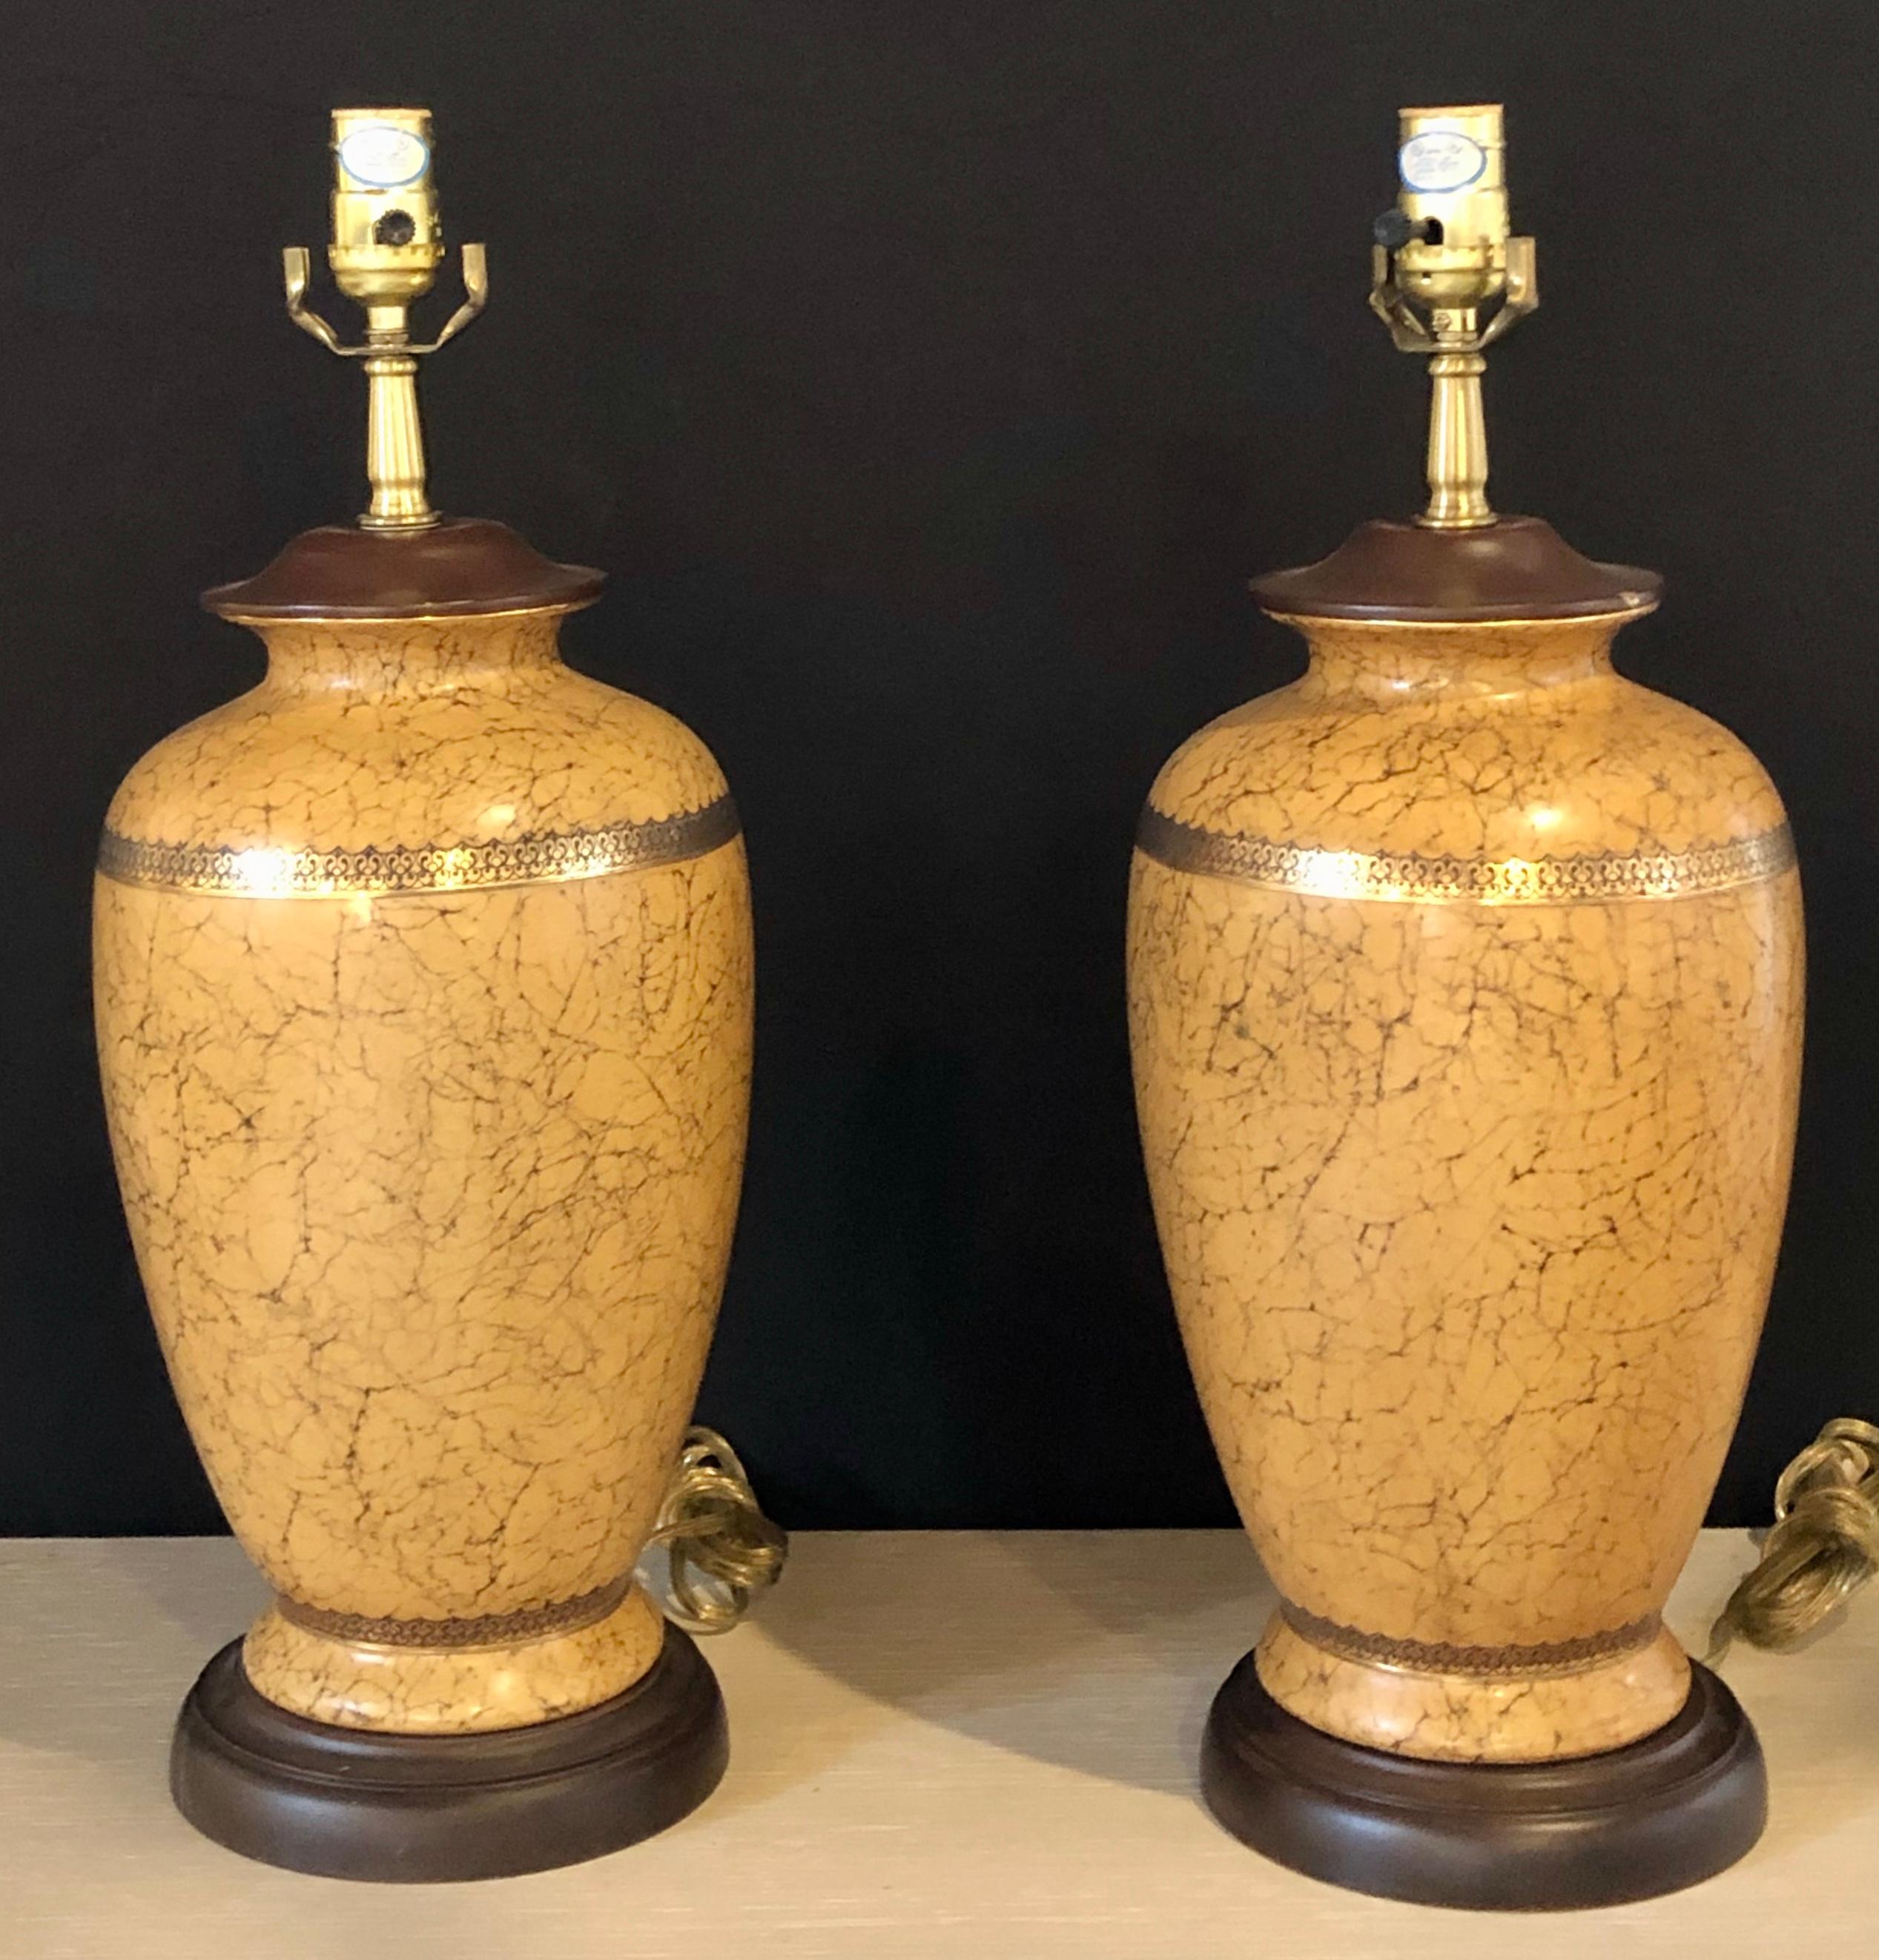 Pair of ceramic lamps with gold trim and crackle finish wooden base bottom.